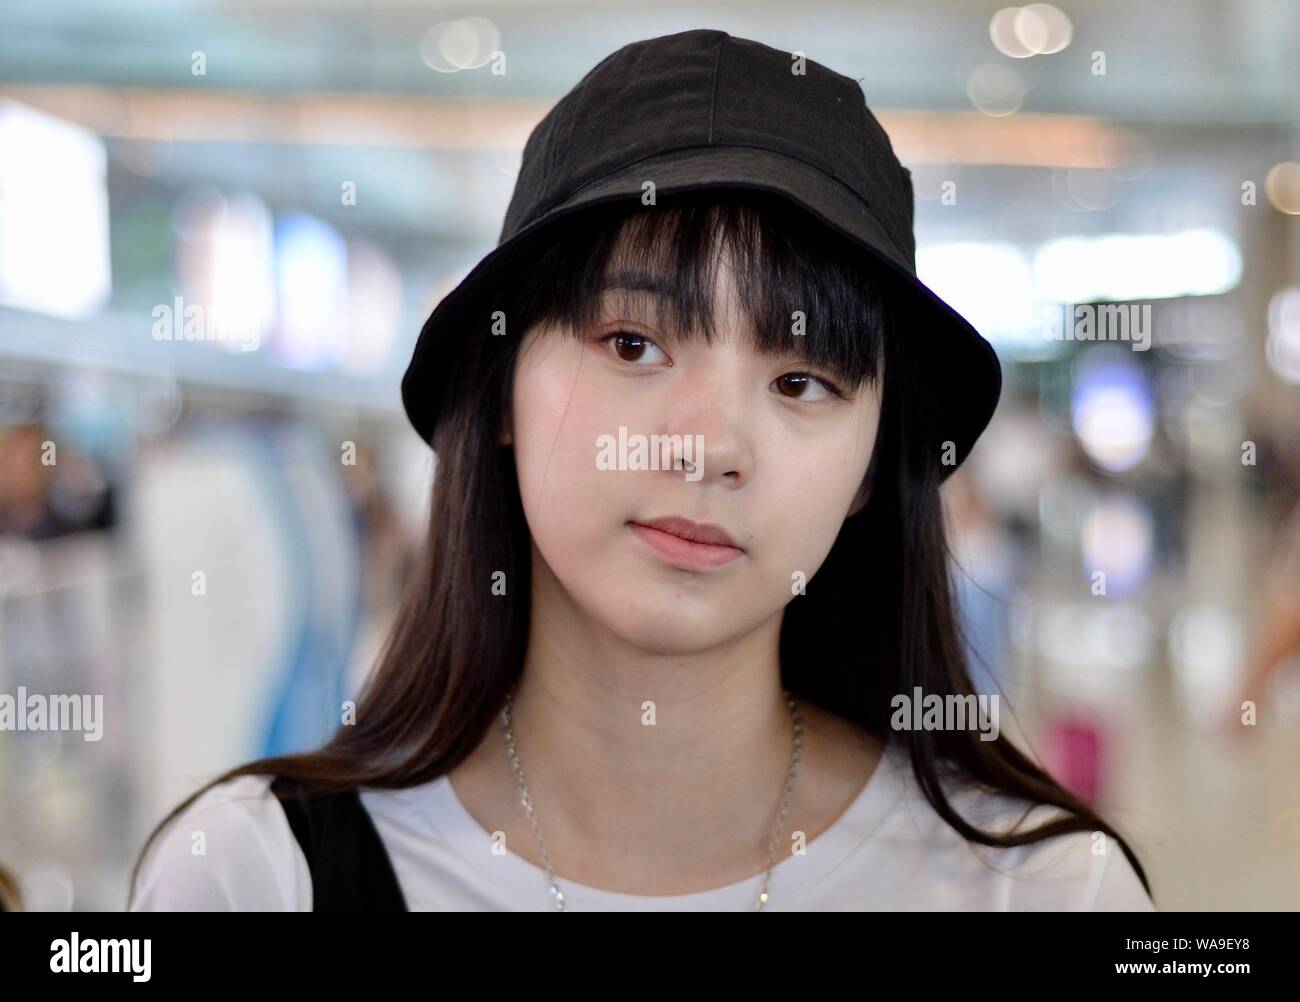 MOYNAT on X: Chinese singer Ouyang Nana and her favorite way to